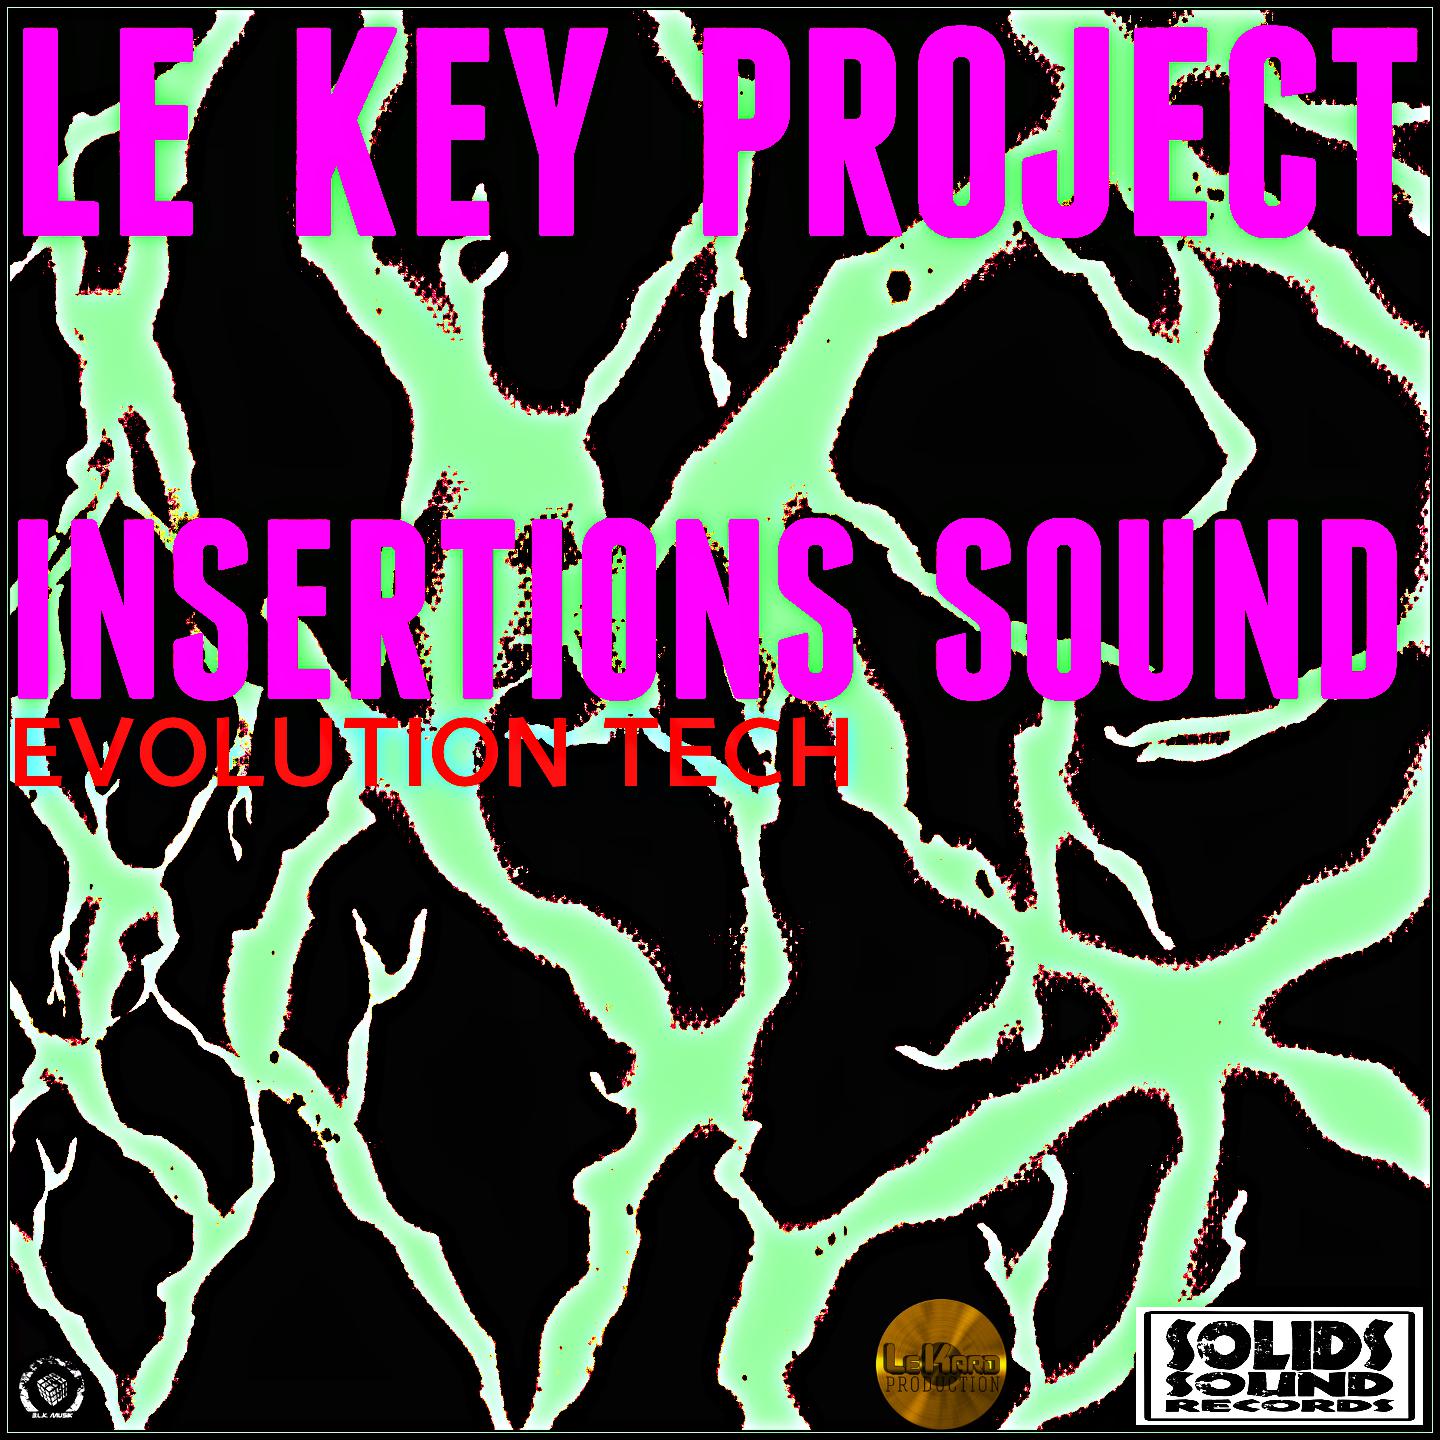 Le Key Project - Higher (Infinity Roll Mix)